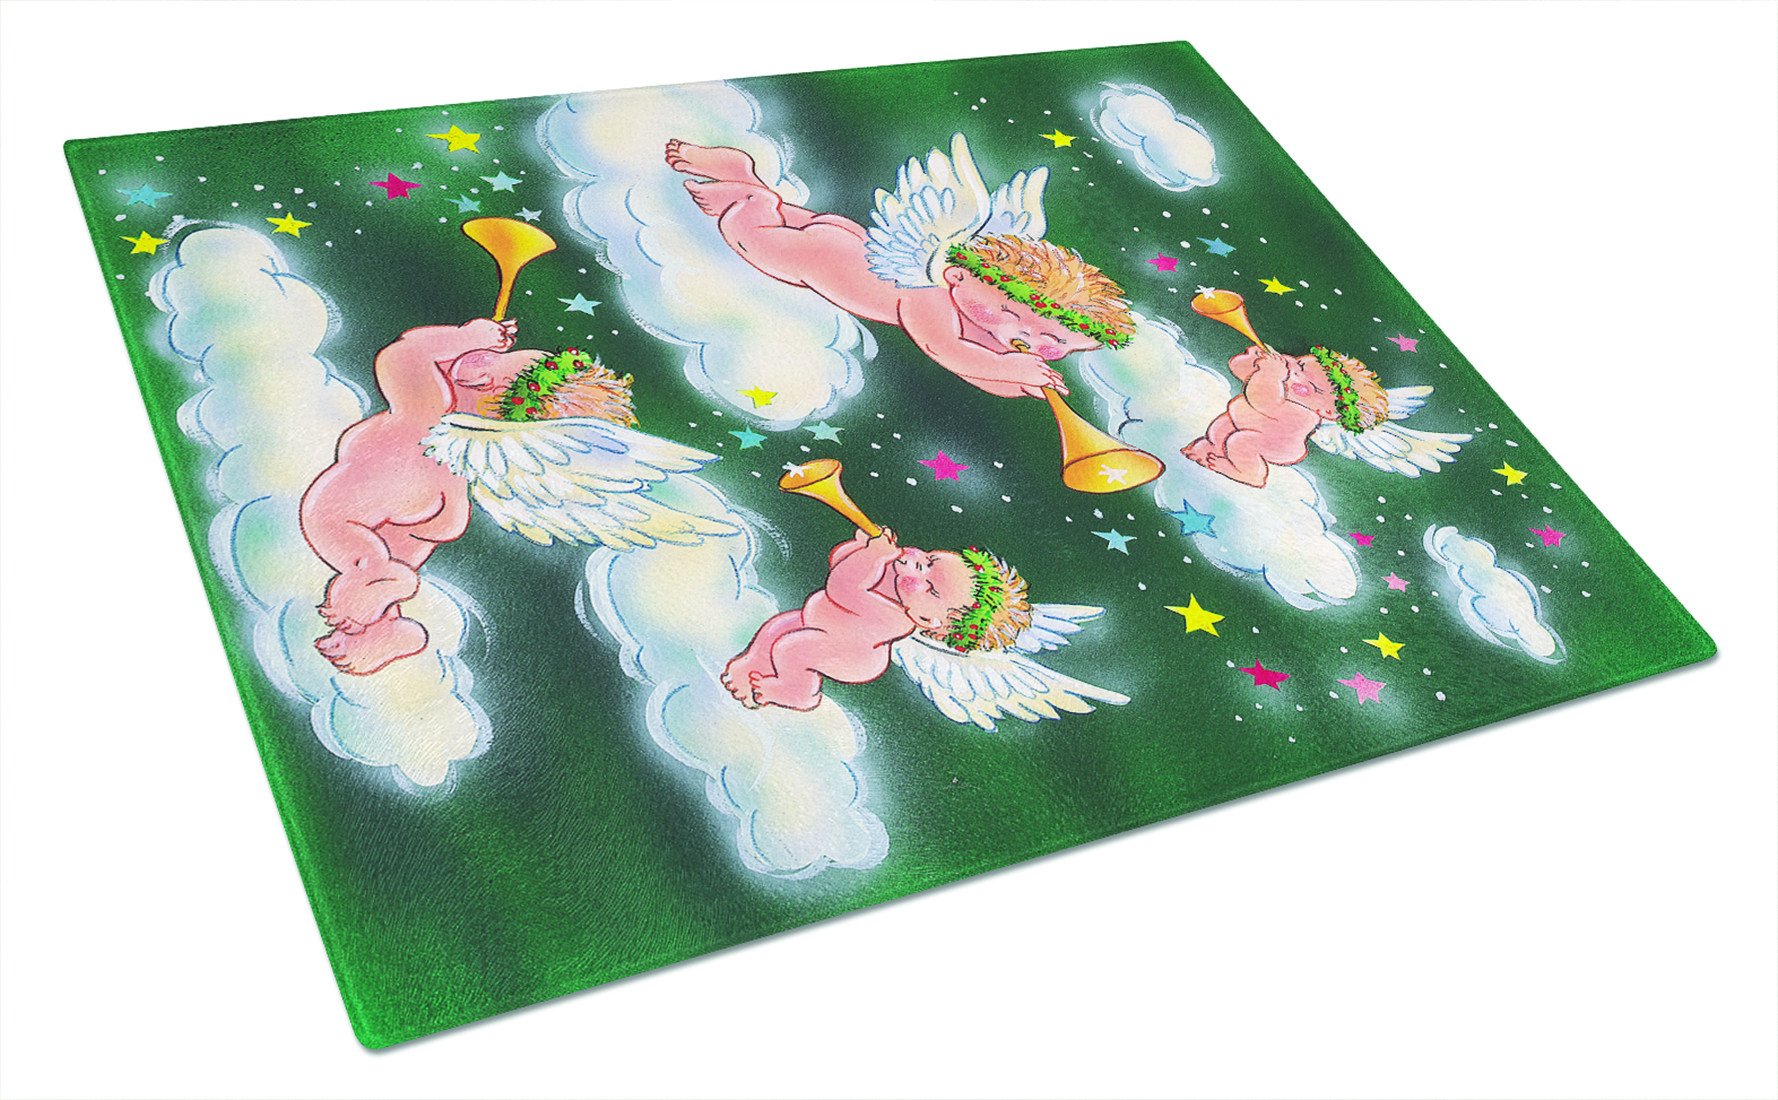 Angels on Green Glass Cutting Board Large AAH7253LCB by Caroline's Treasures